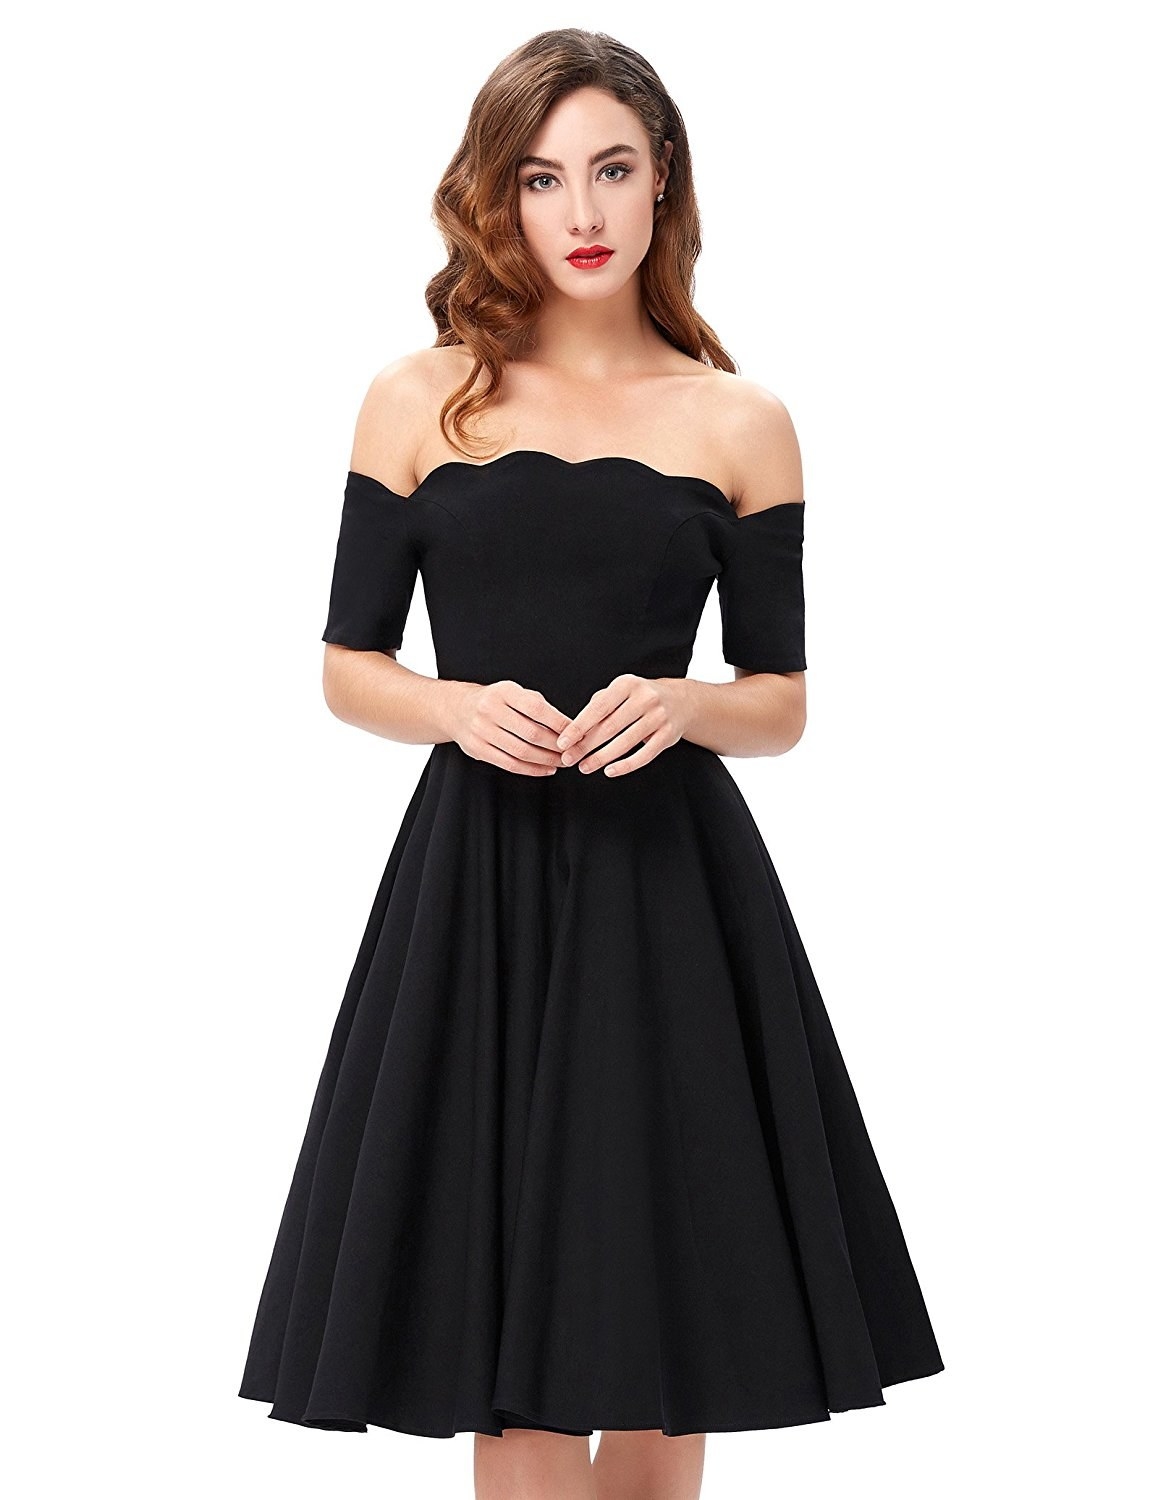 11 Gorgeous Dresses That Deserve To Be Danced In